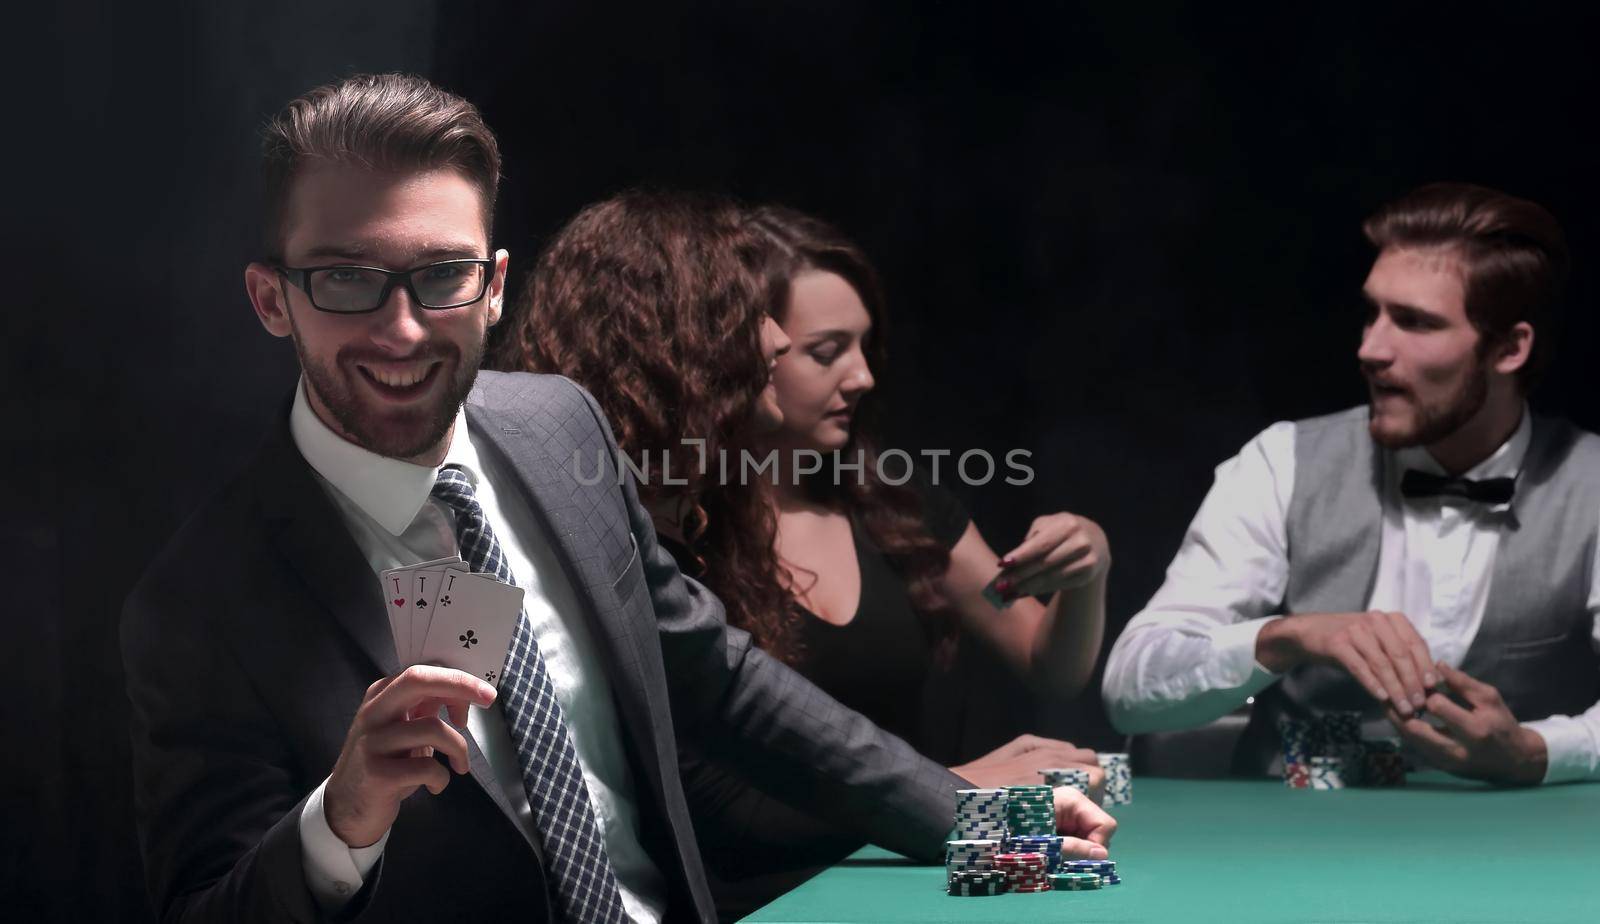 background image. game of poker. players sitting at a green gaming table